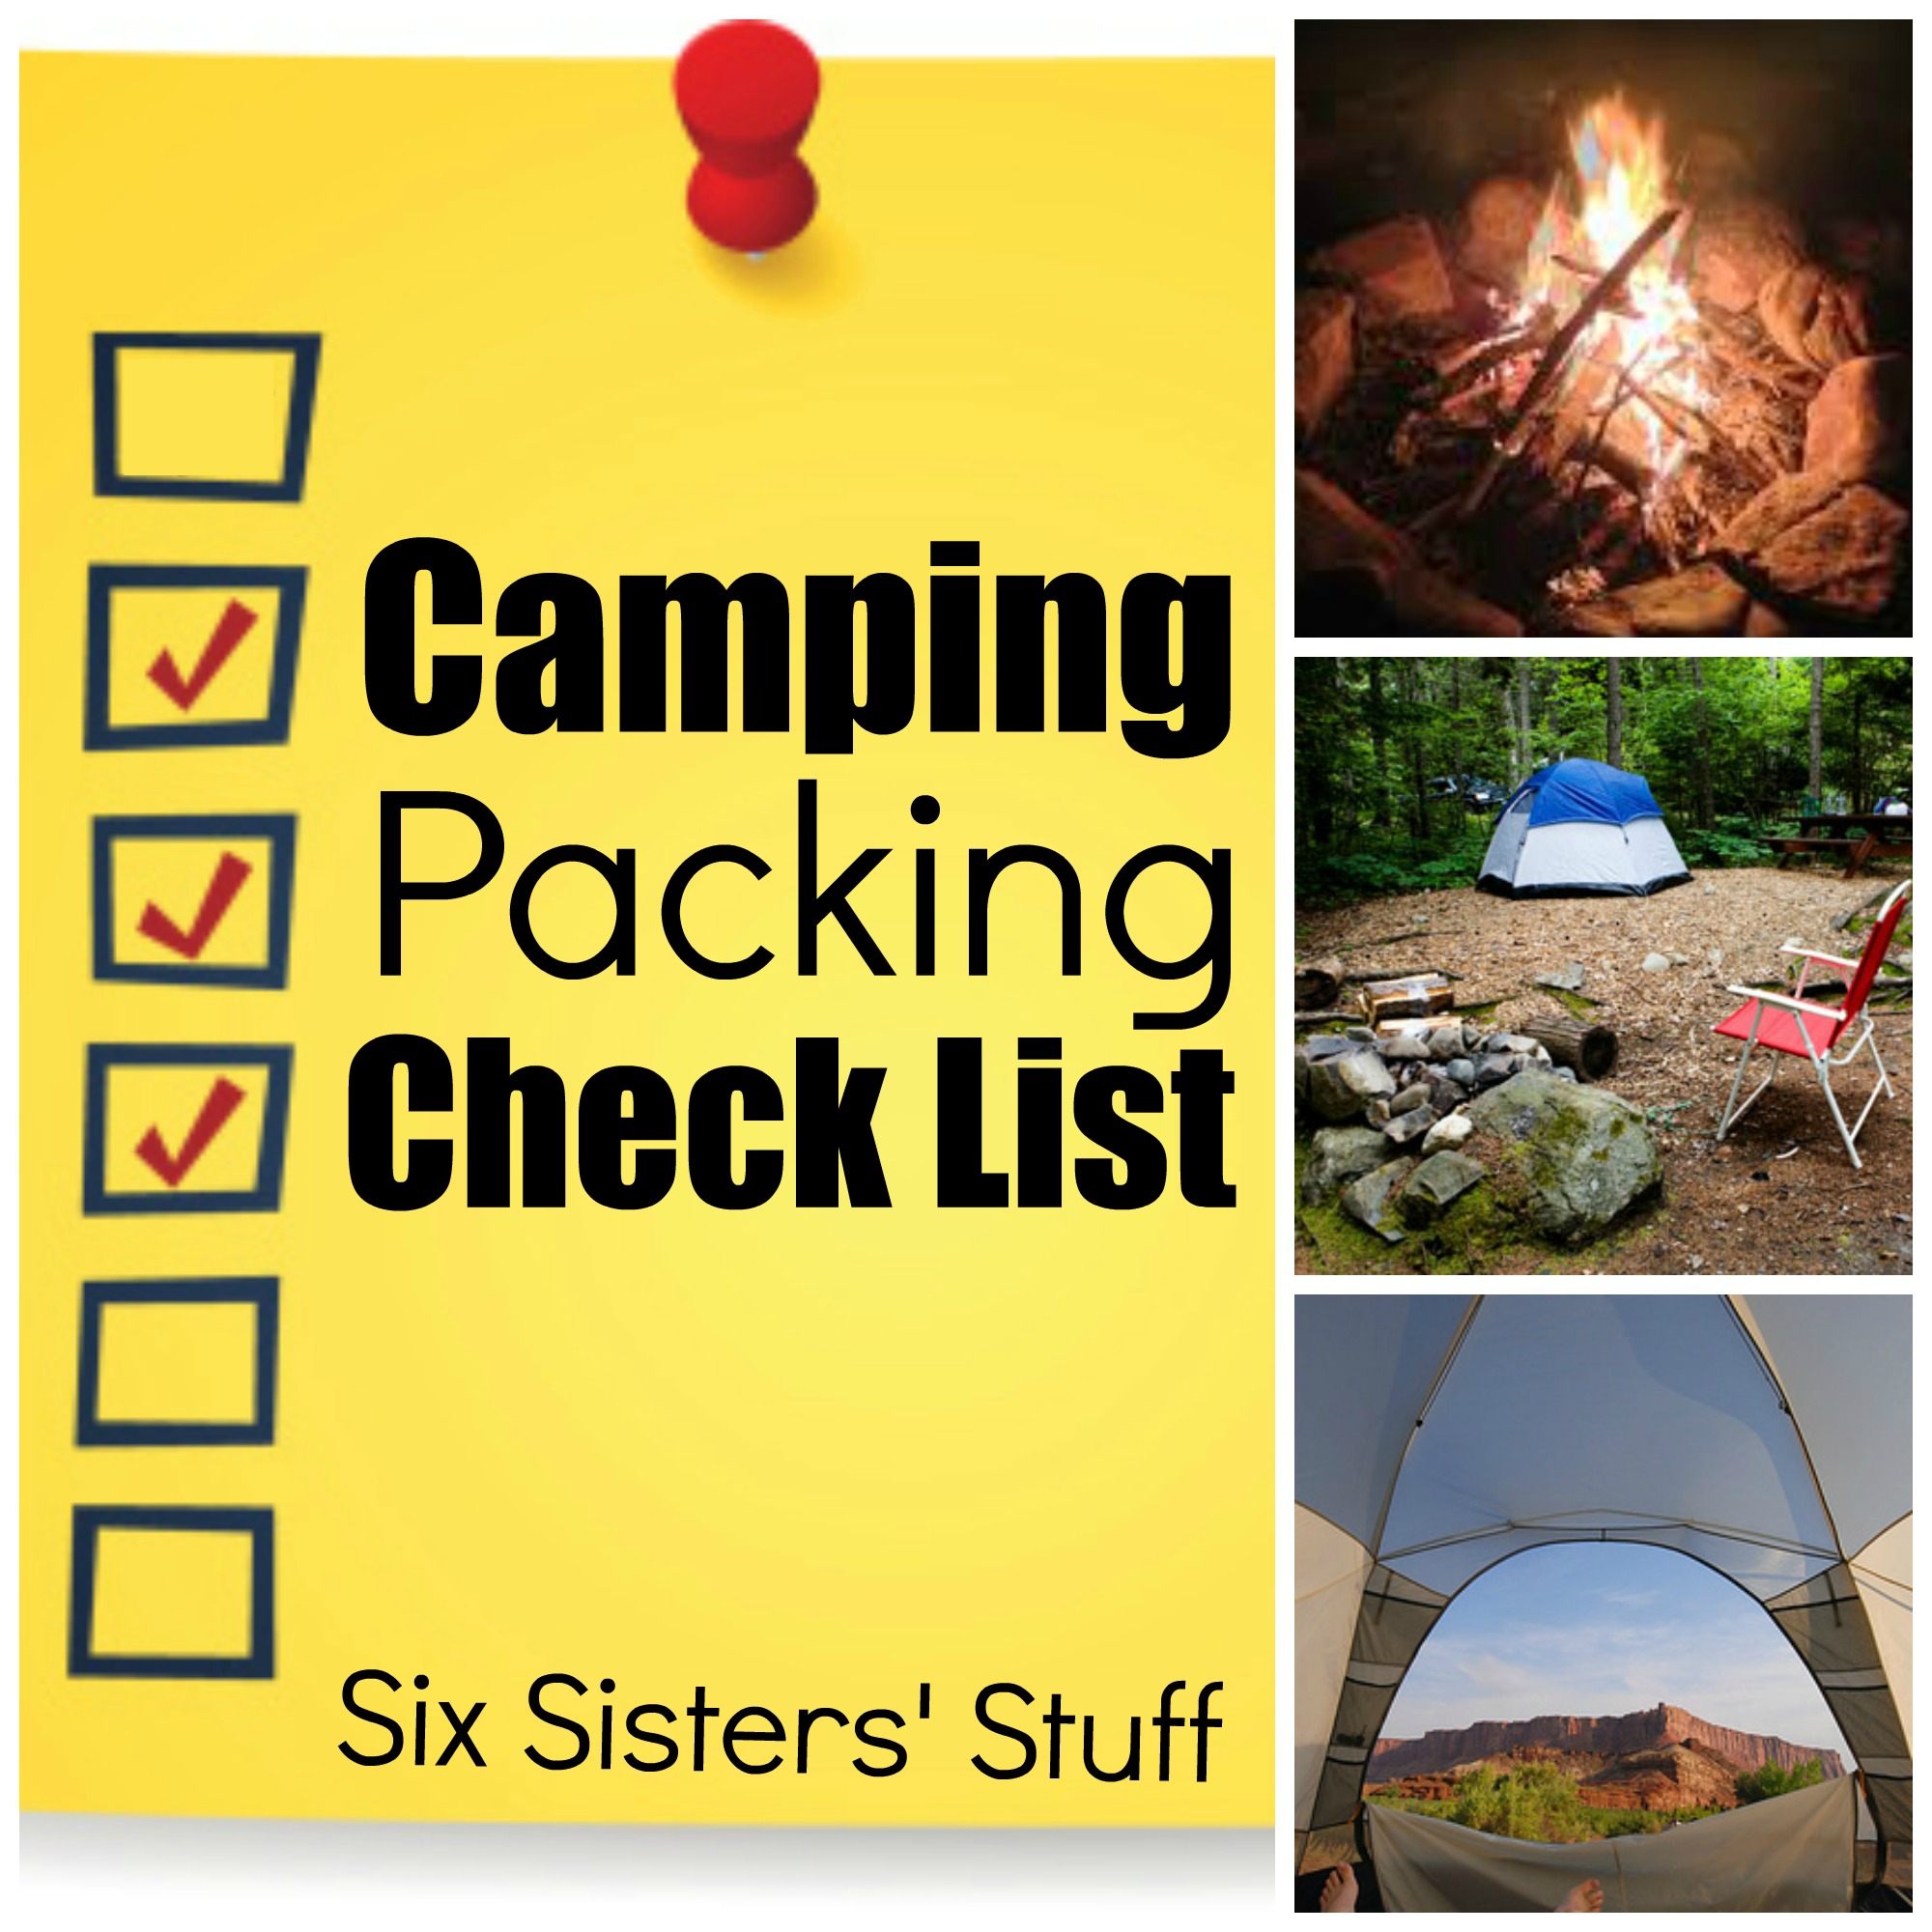 Camping Packing Checklist